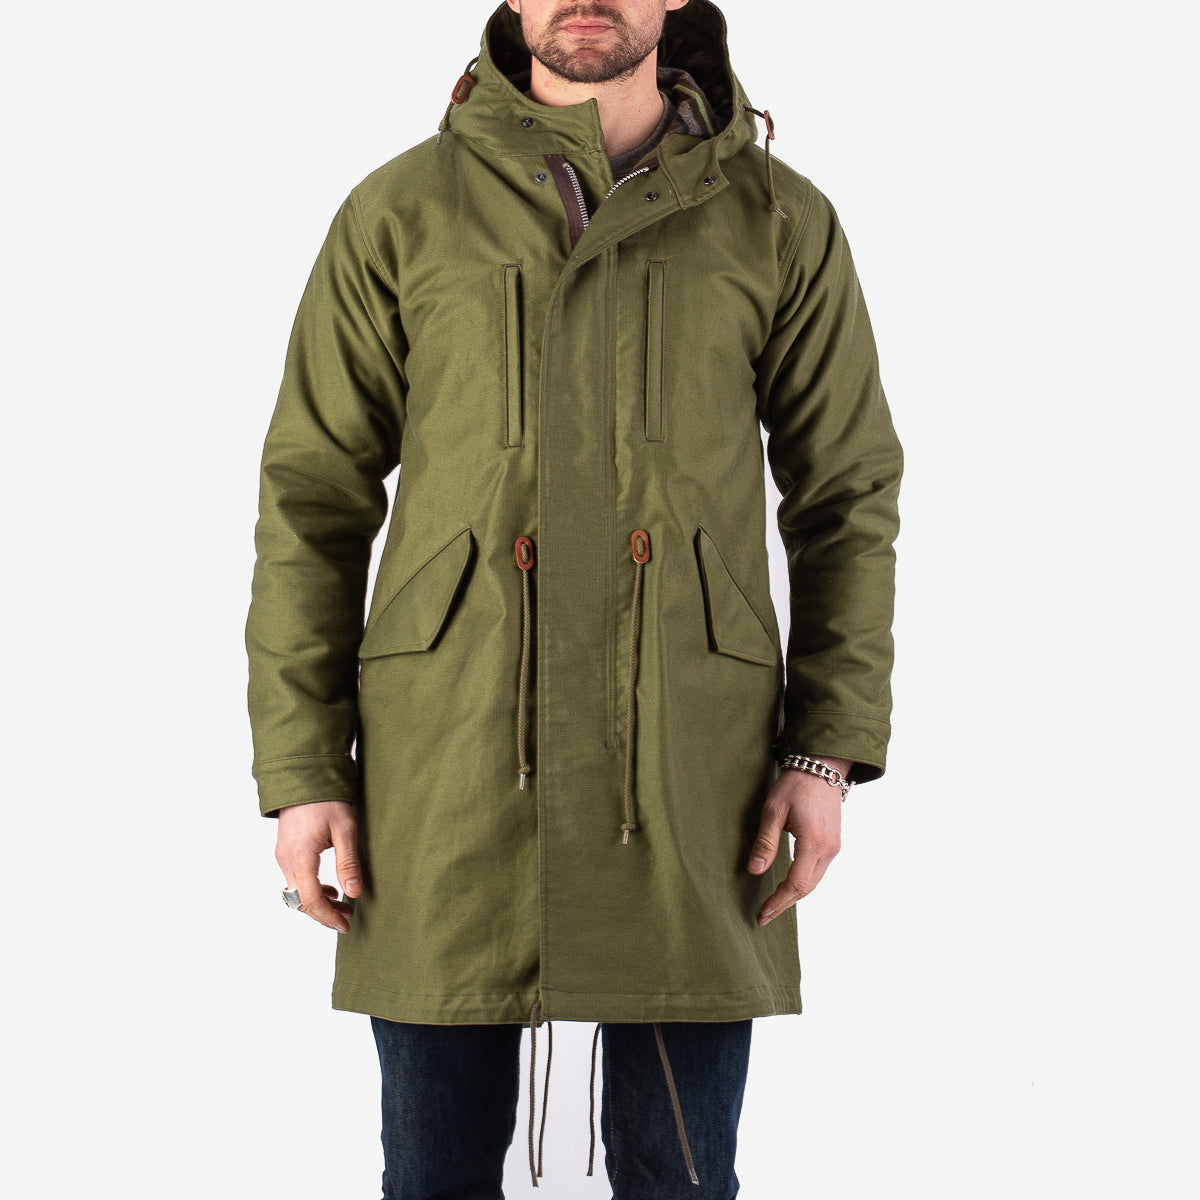 Heart Field Drab Coat Olive M-51 IHM-34 – Iron Whipcord